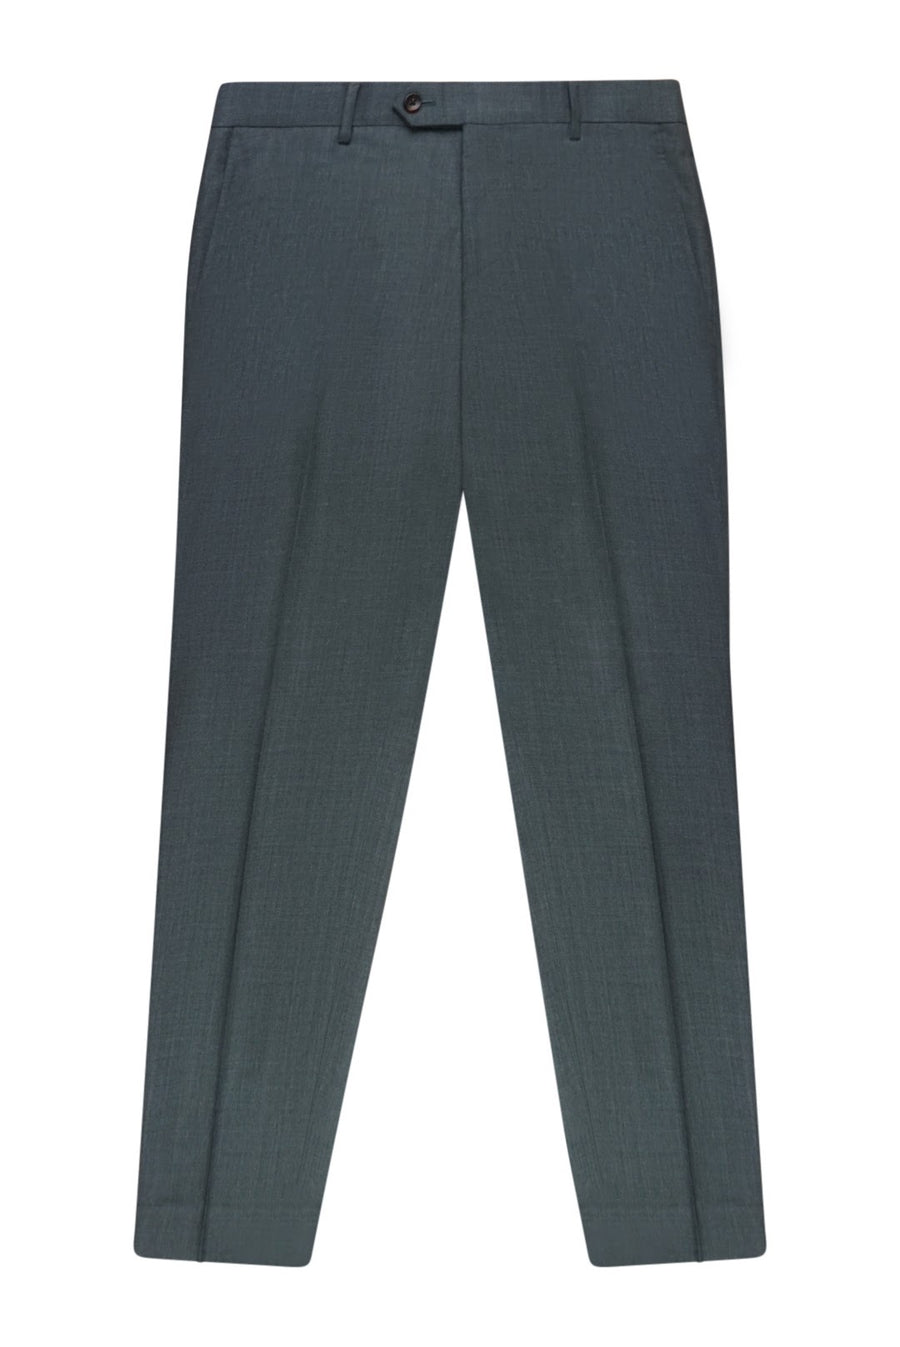 Slim Stretch Marle Tailored Pant - Light Grey, Suit Pants